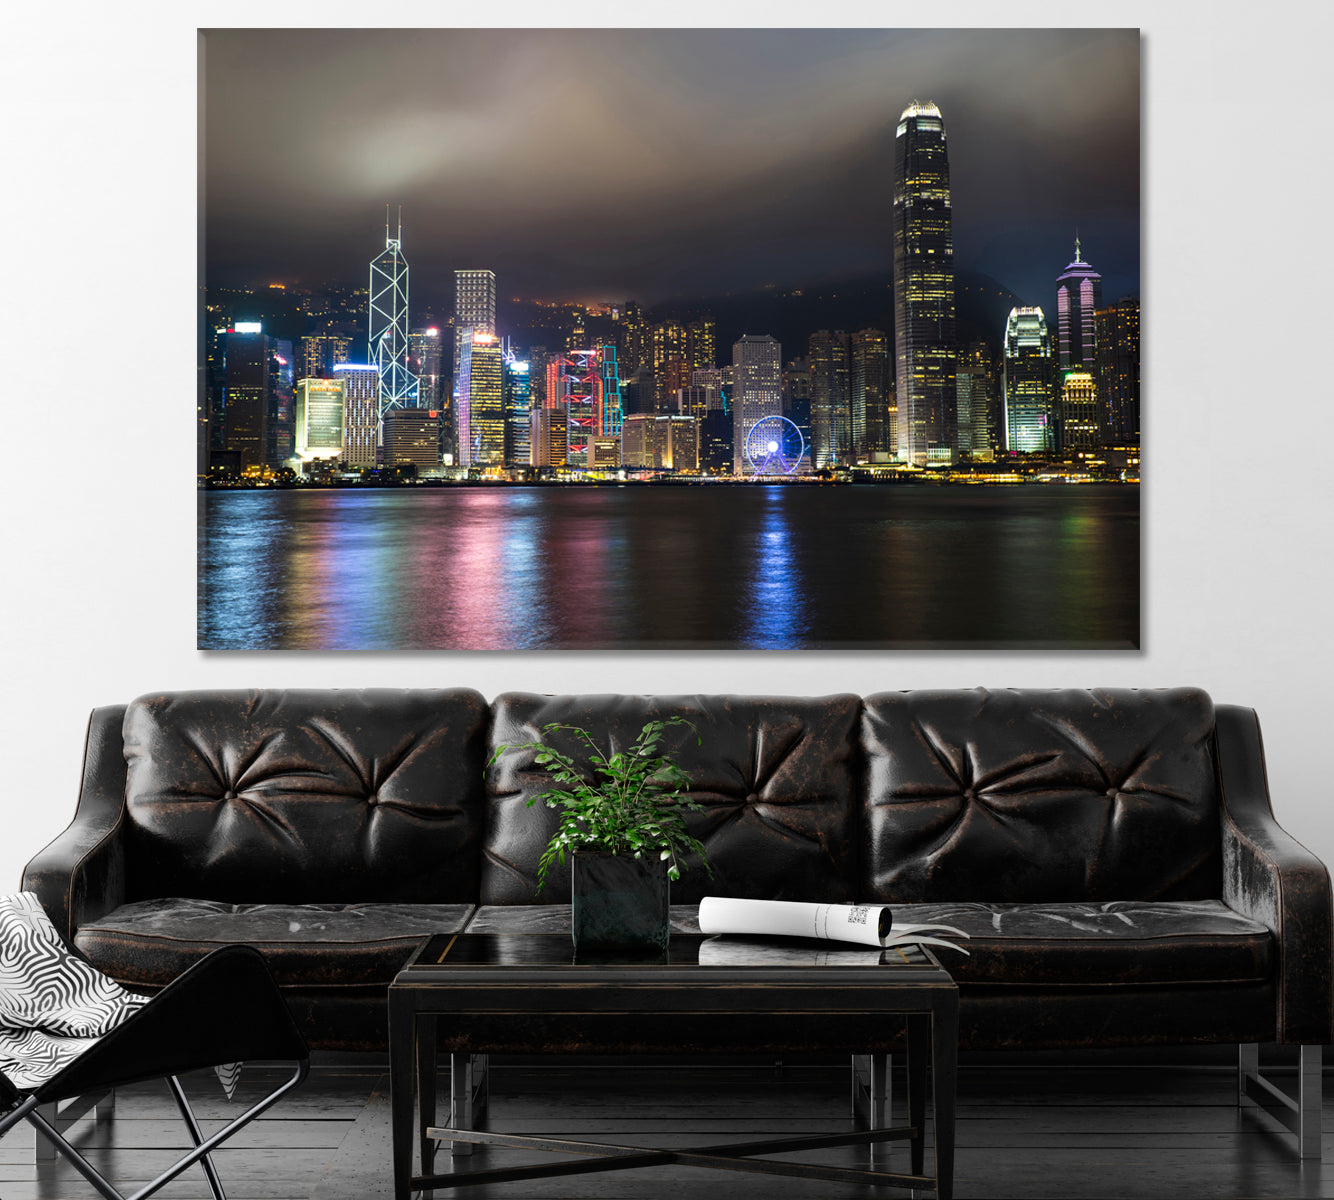 Hong Kong Victoria Harbour at Night Canvas Print ArtLexy 1 Panel 24"x16" inches 